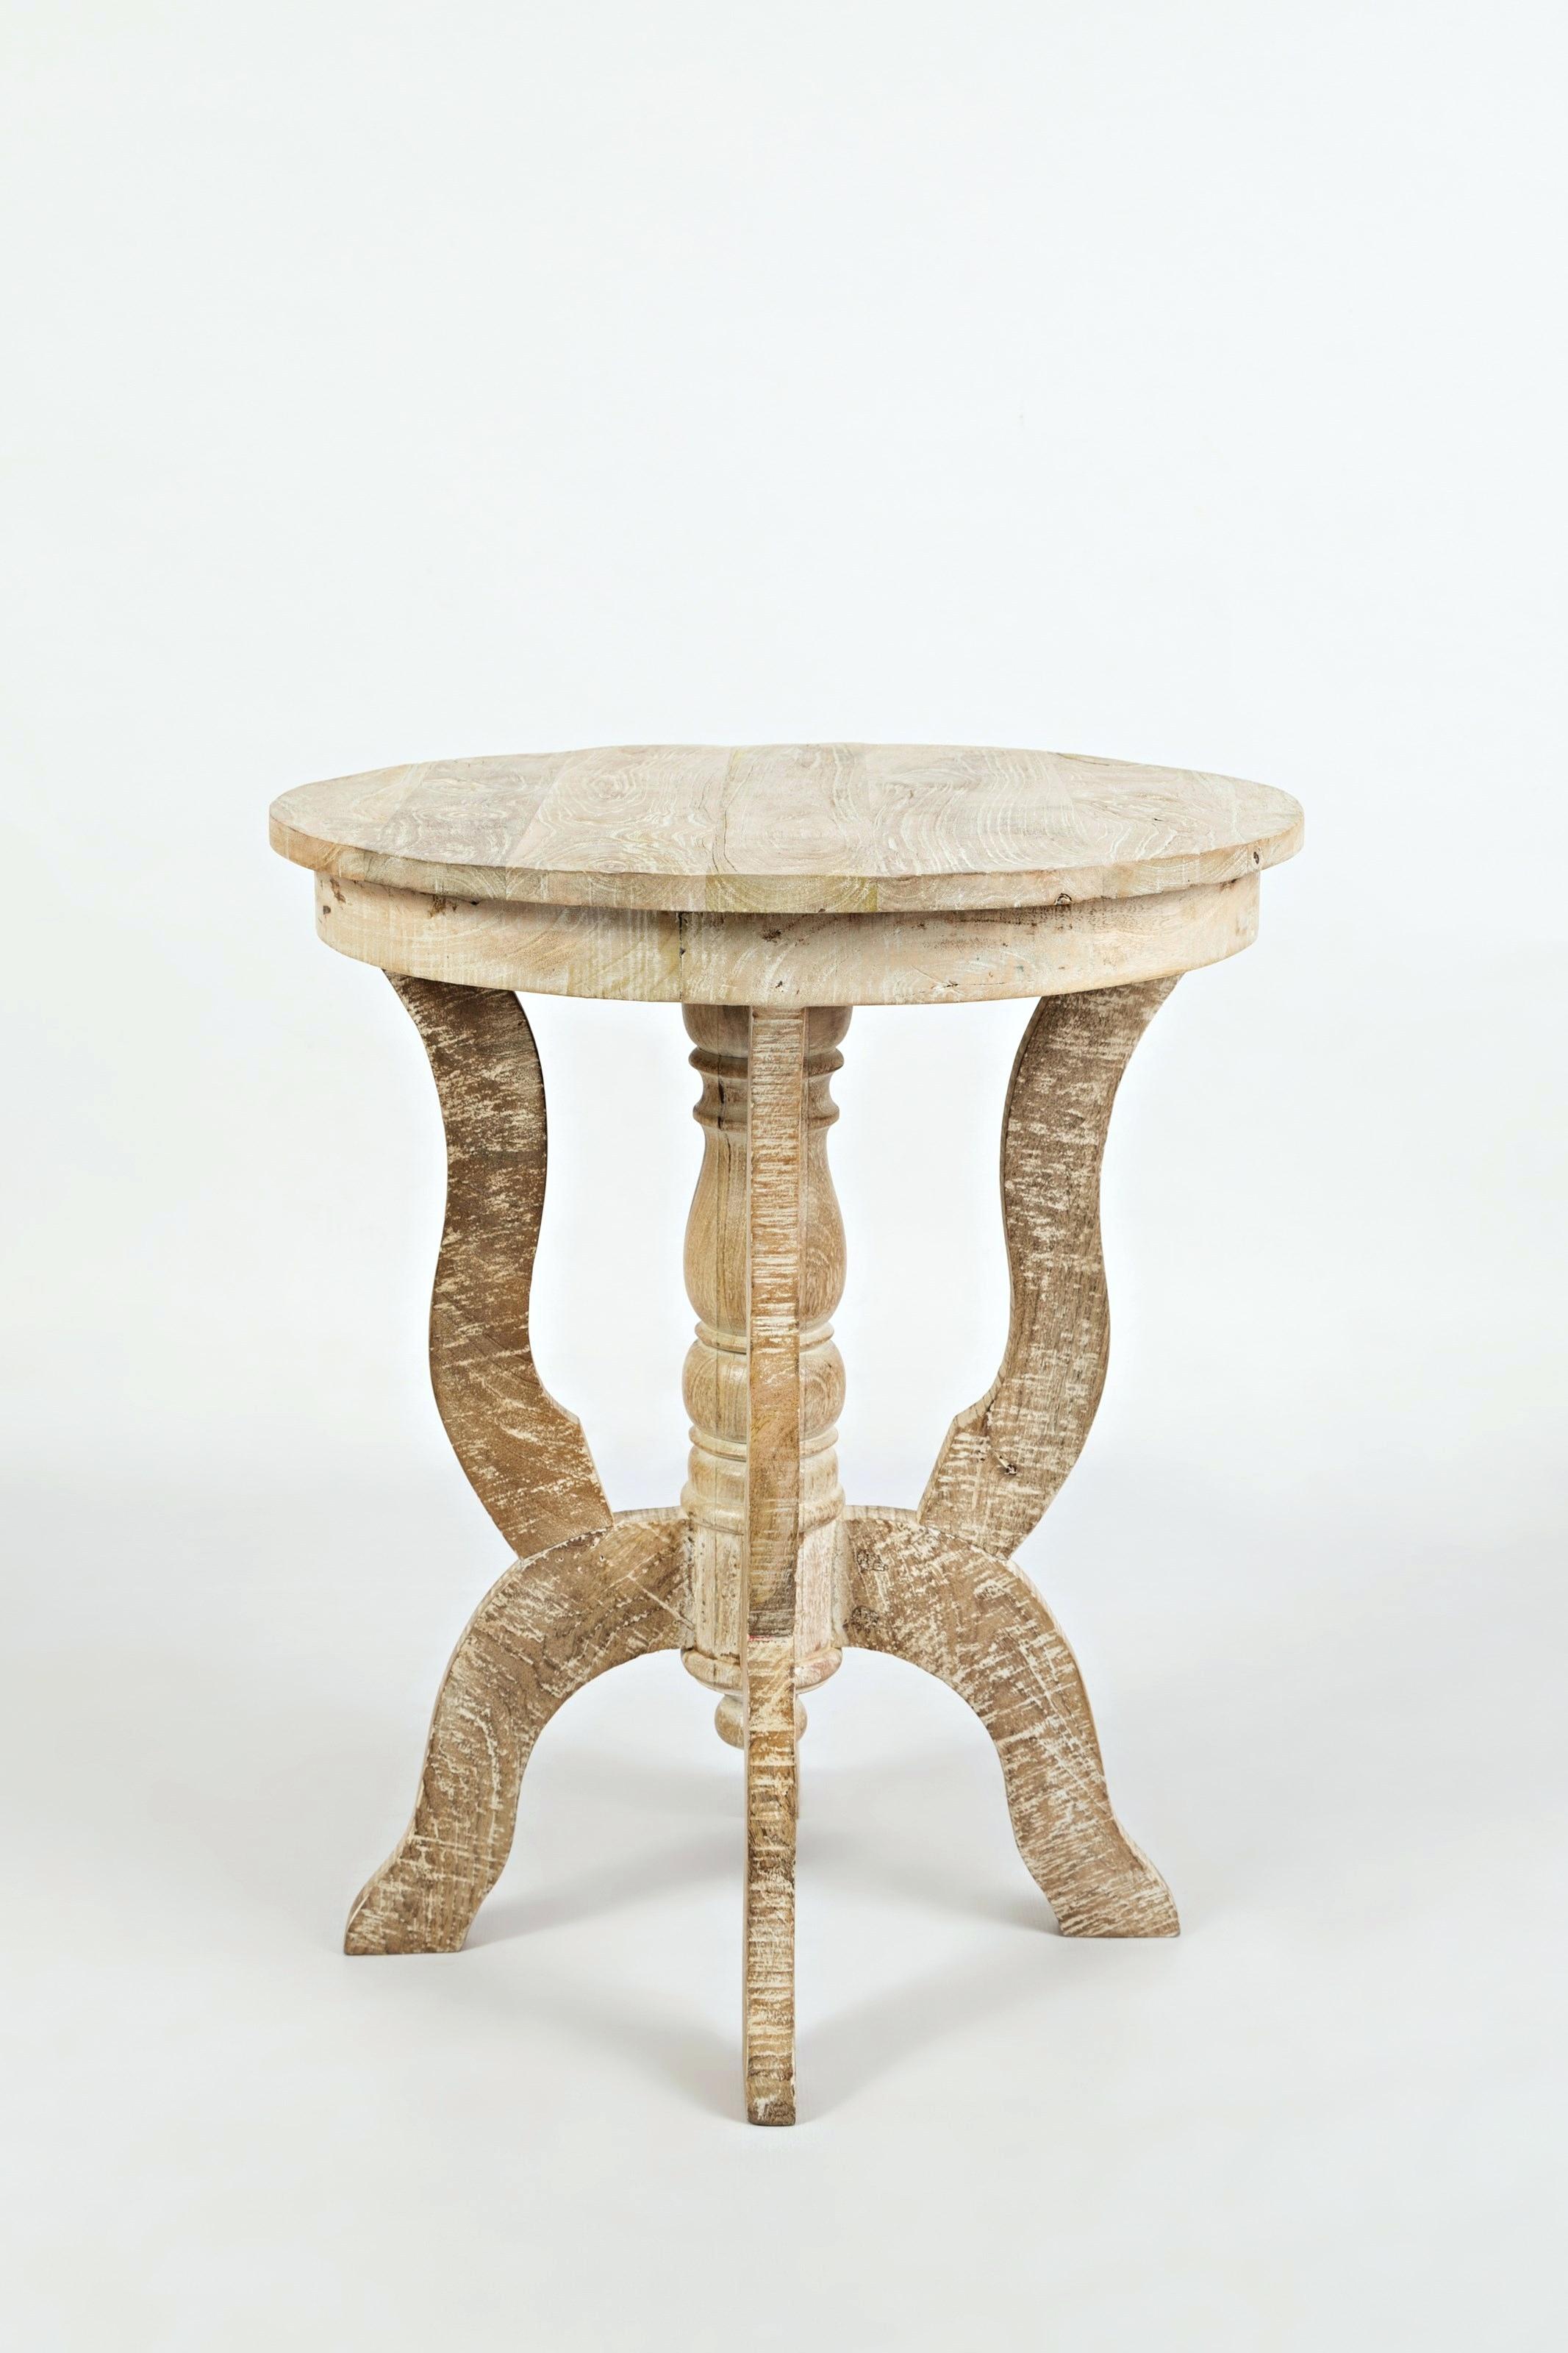 round accent table drum target jlroelly info global archive marble dining room furniture bistro set mosaic wood pedestal antique threshold gold side outdoor folding chairs shabby